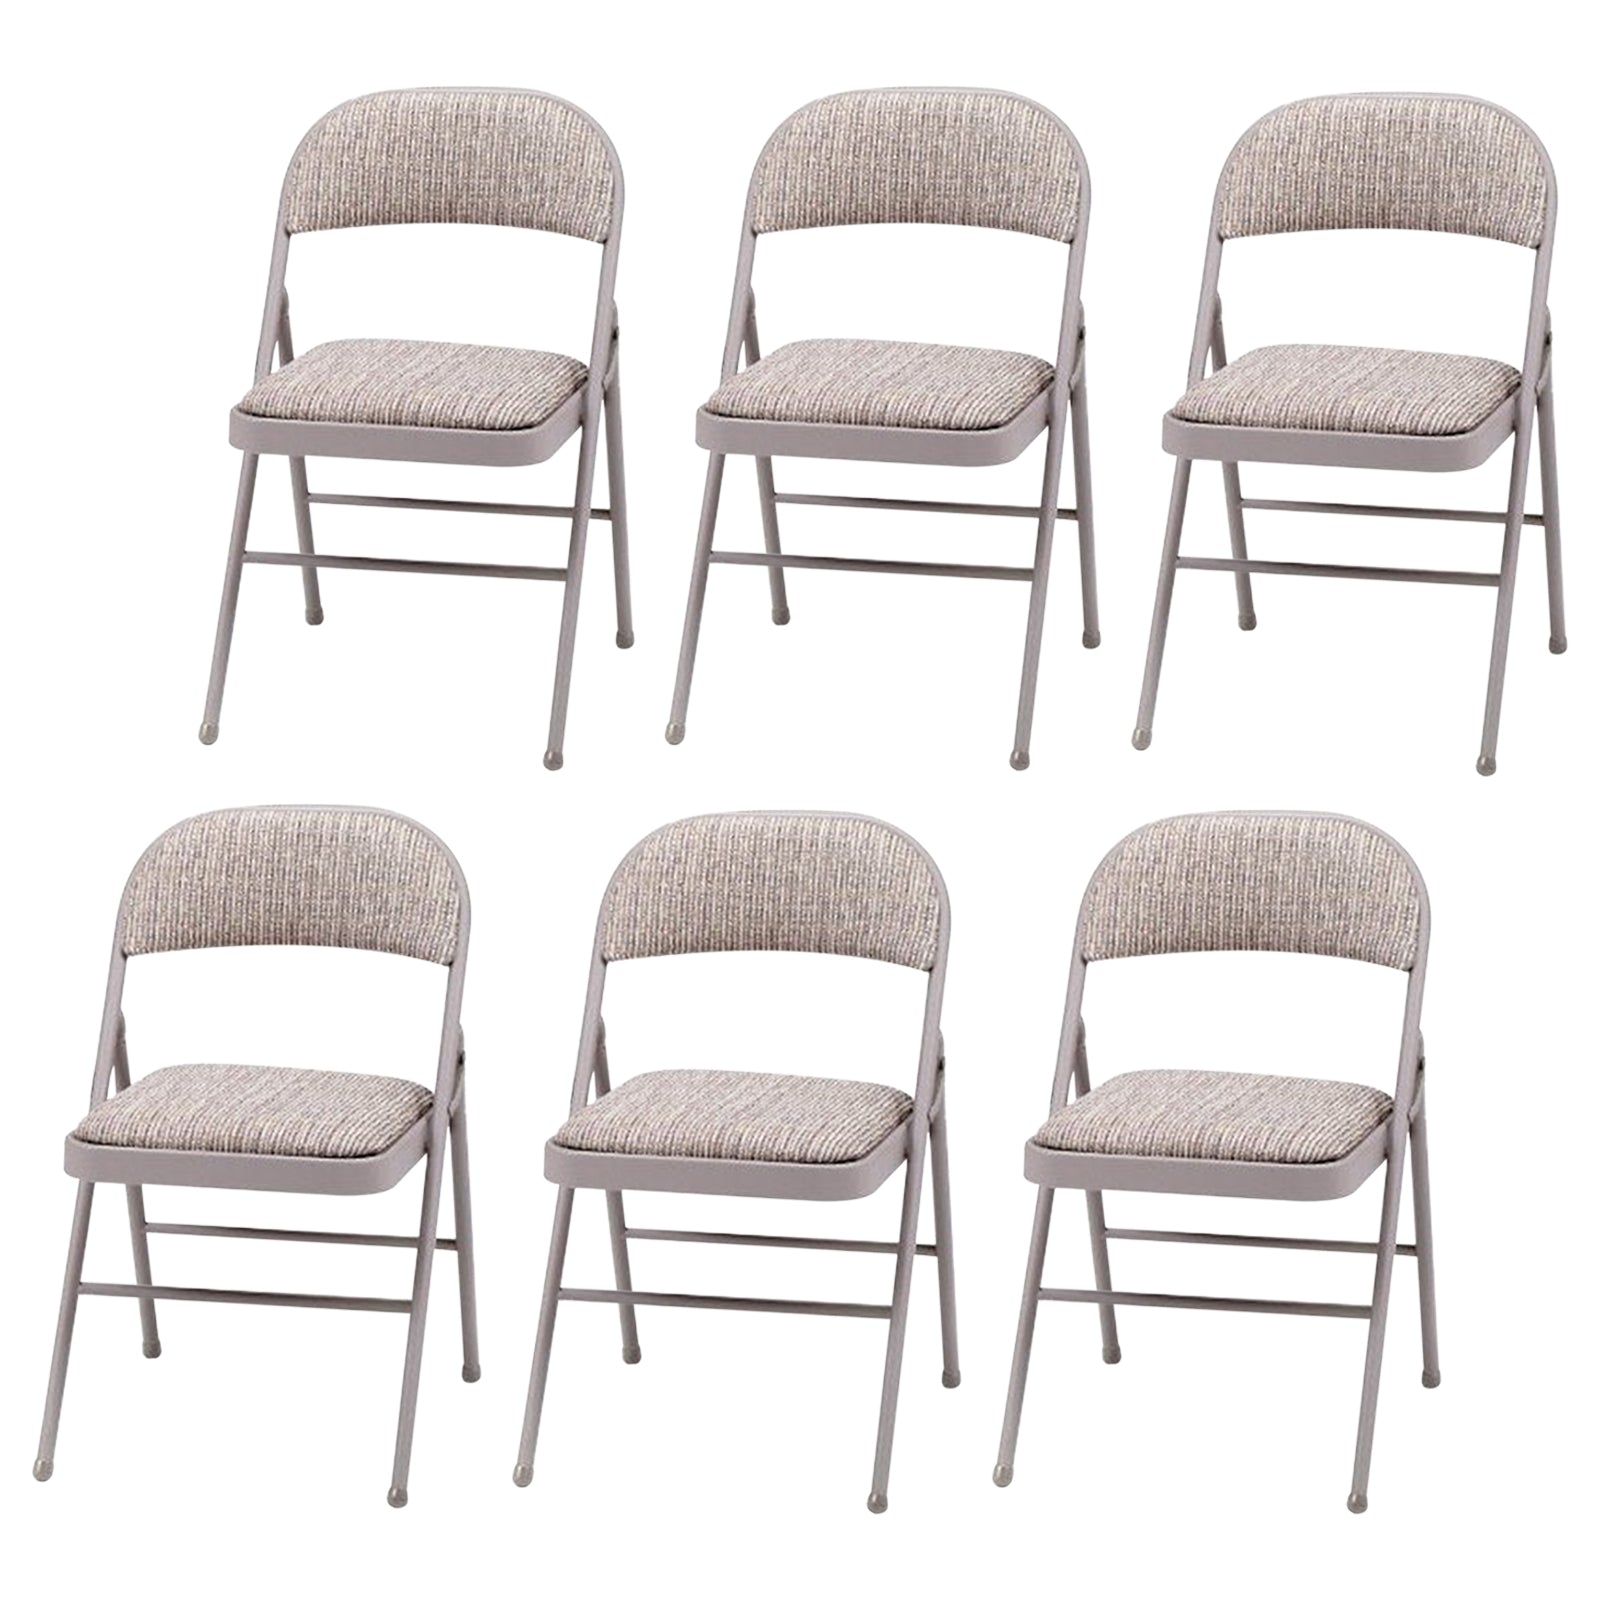 Deluxe Comfort Folding Chairs